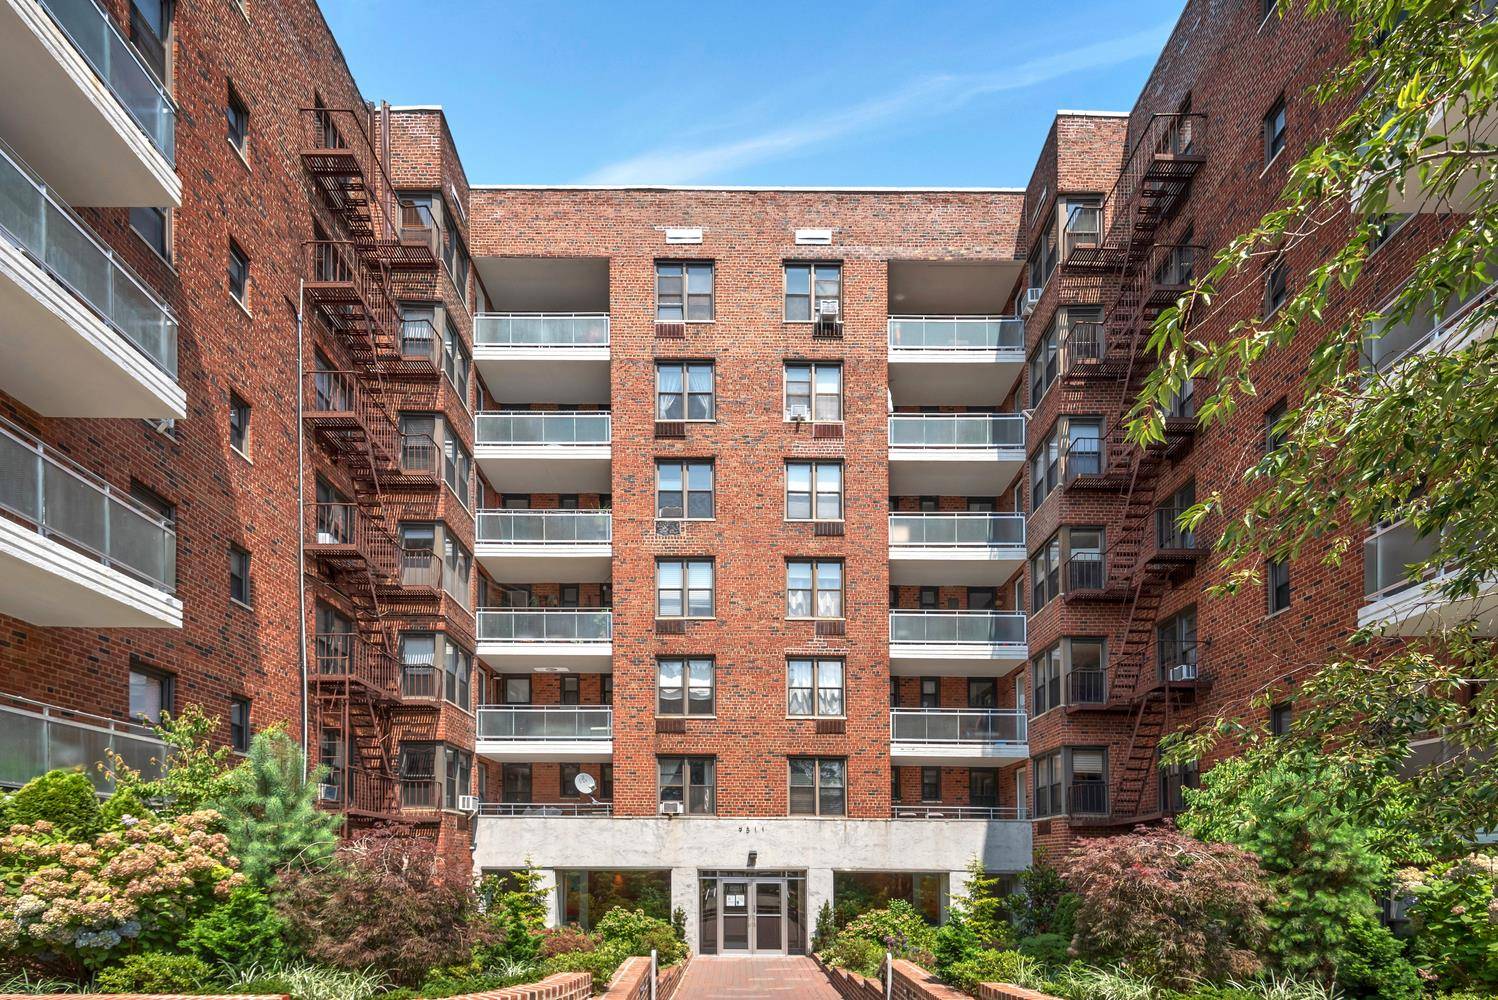 Welcome to 9511 Shore Road 313, a charismatic one bedroom condominium nestled in the heart of Bay Ridge, Brooklyn.